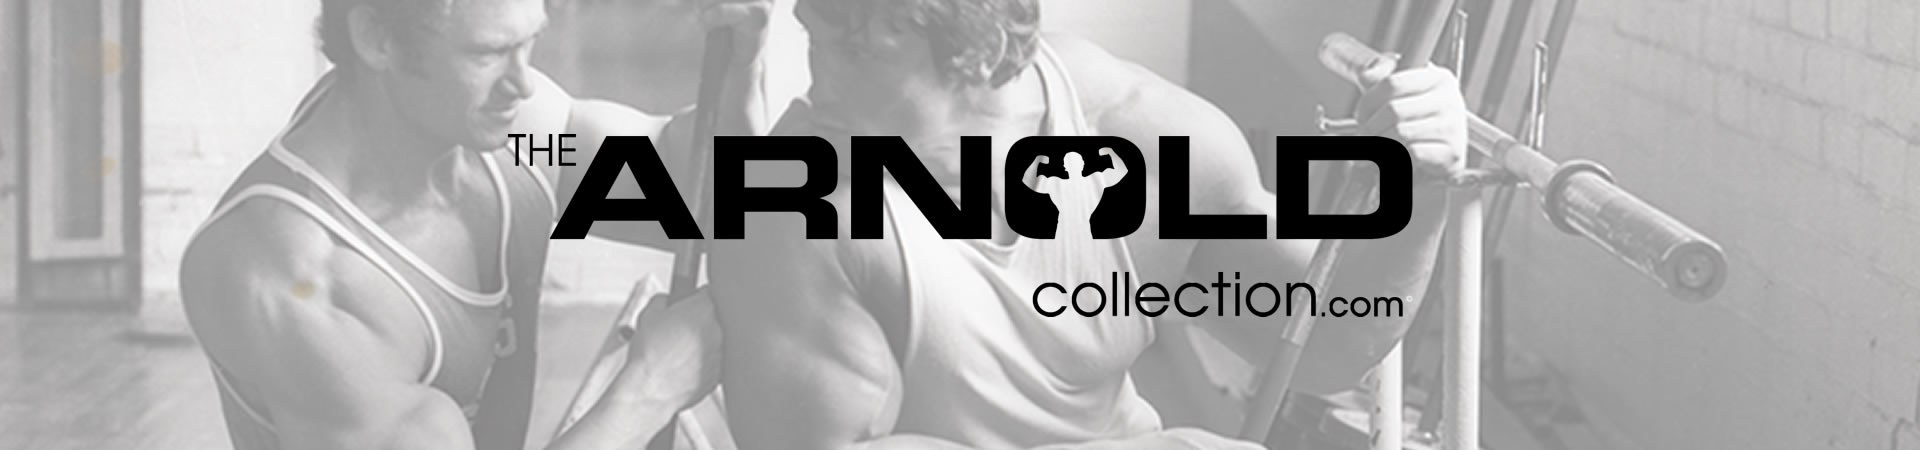 (c) Thearnoldcollection.com